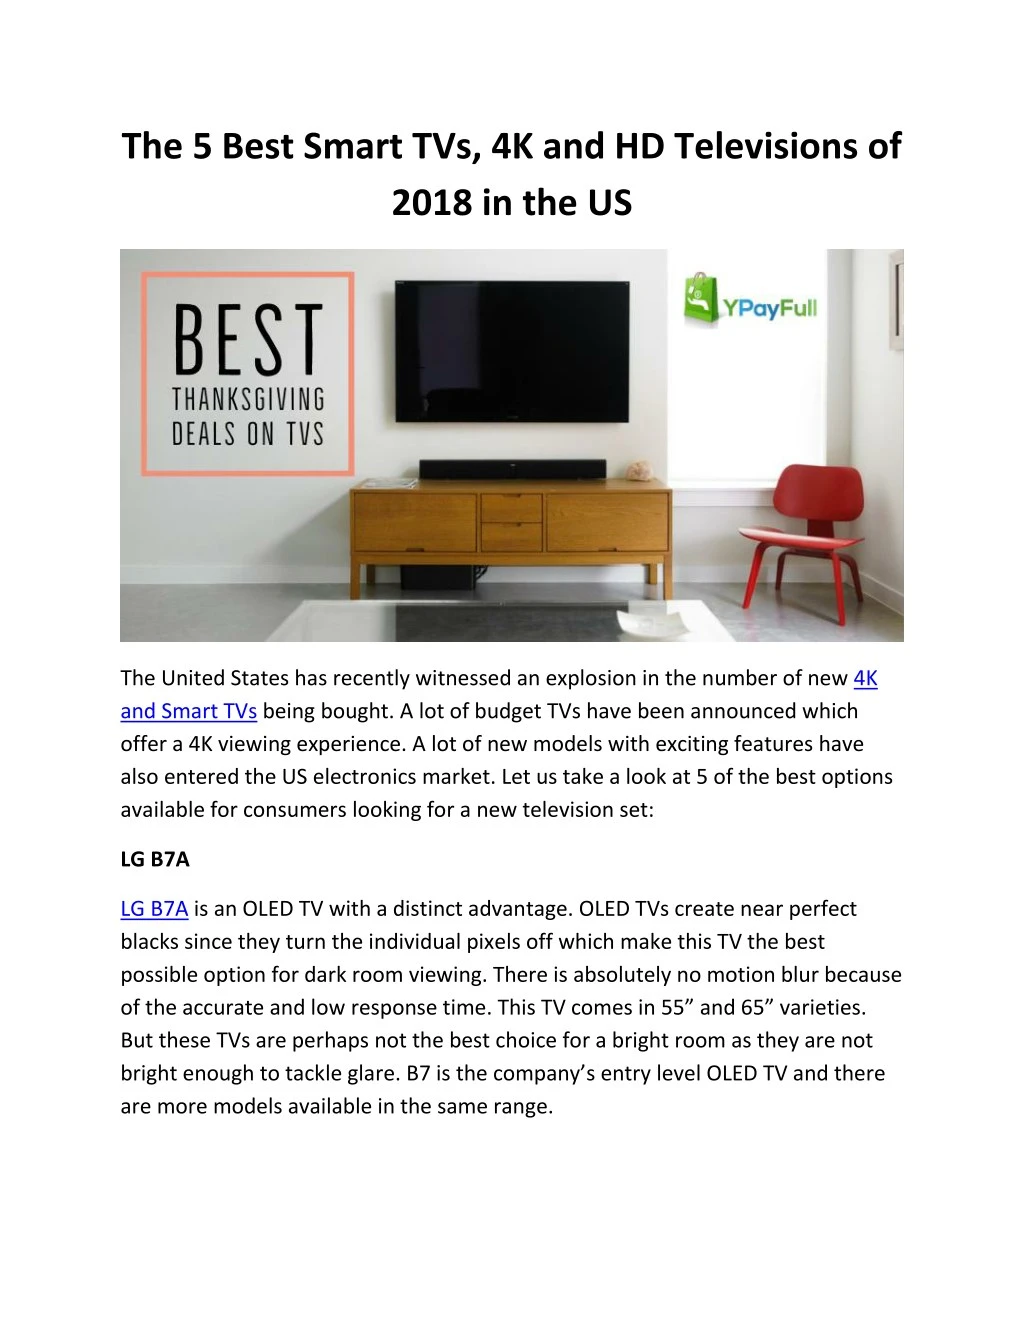 PPT - The 5 Best Smart TVs, 4K and HD Televisions available at Great ...